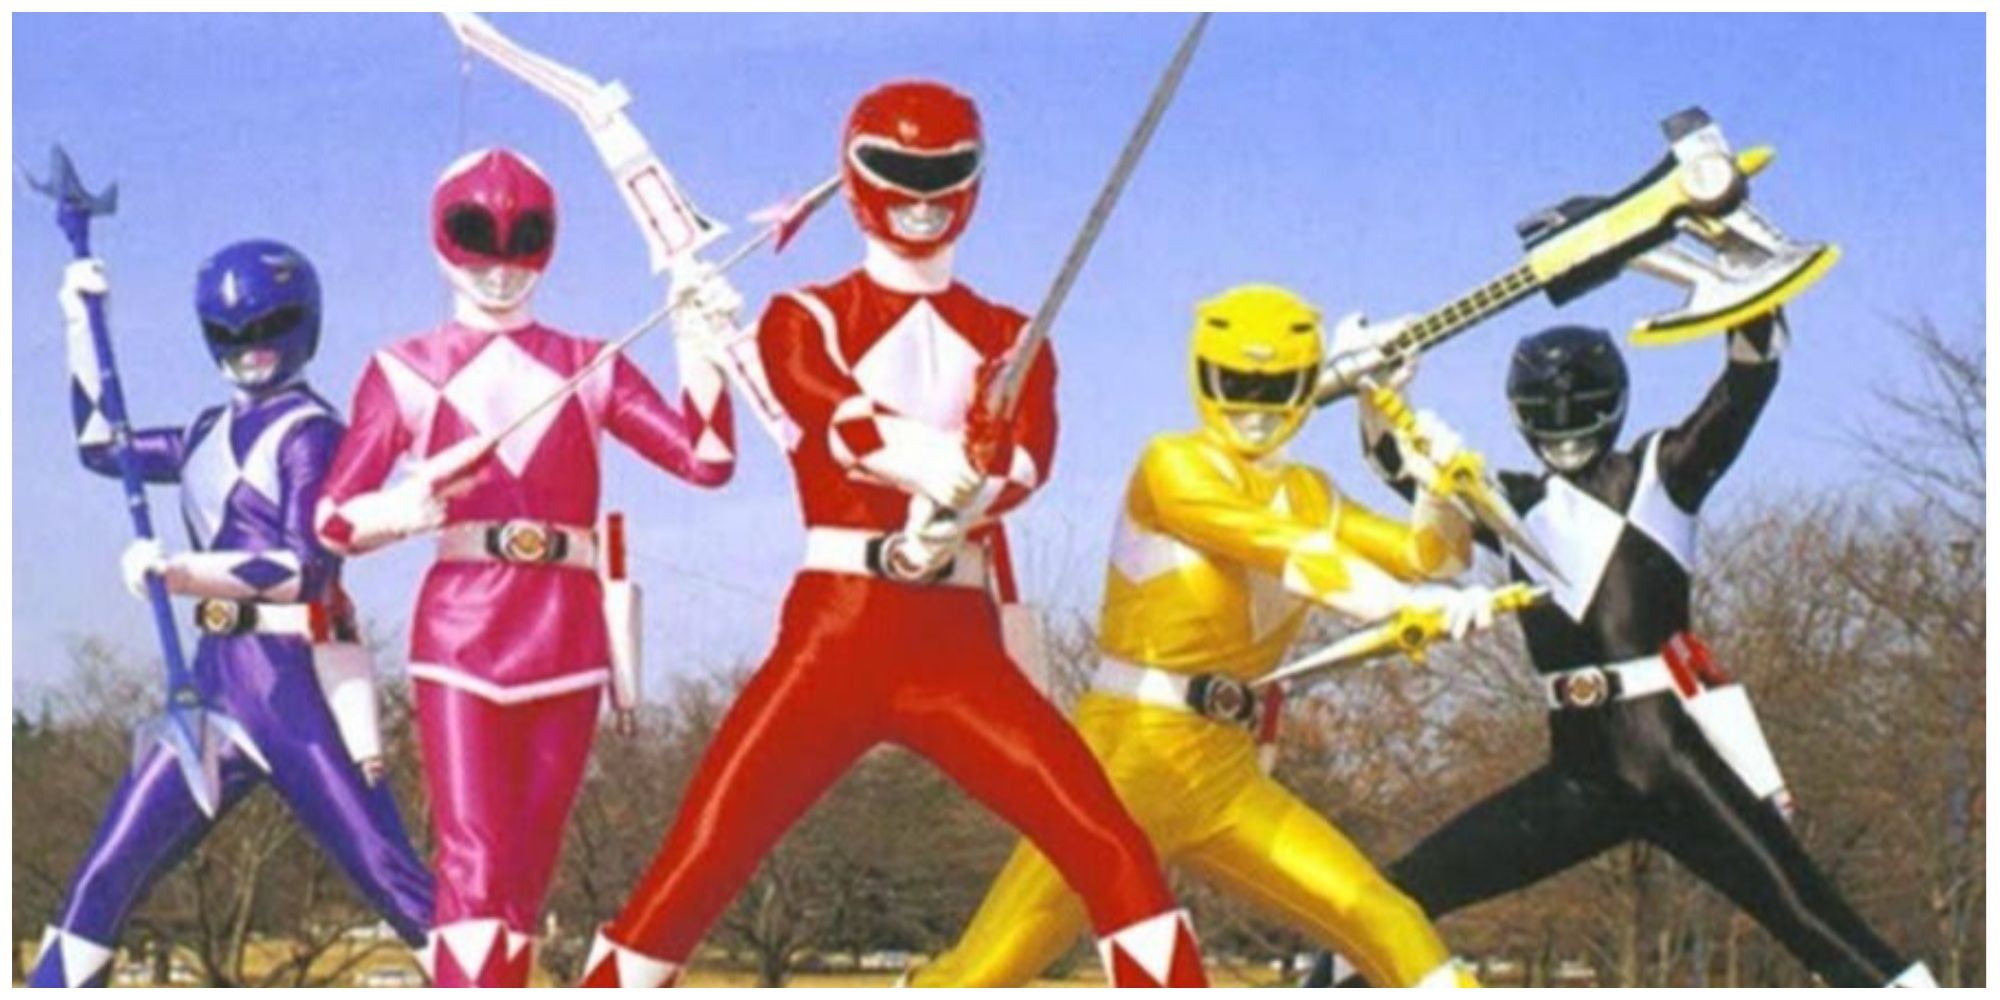 Title: Speculation Grows as Rumors Suggest Fortnite and Power Rangers Collaboration-content-image